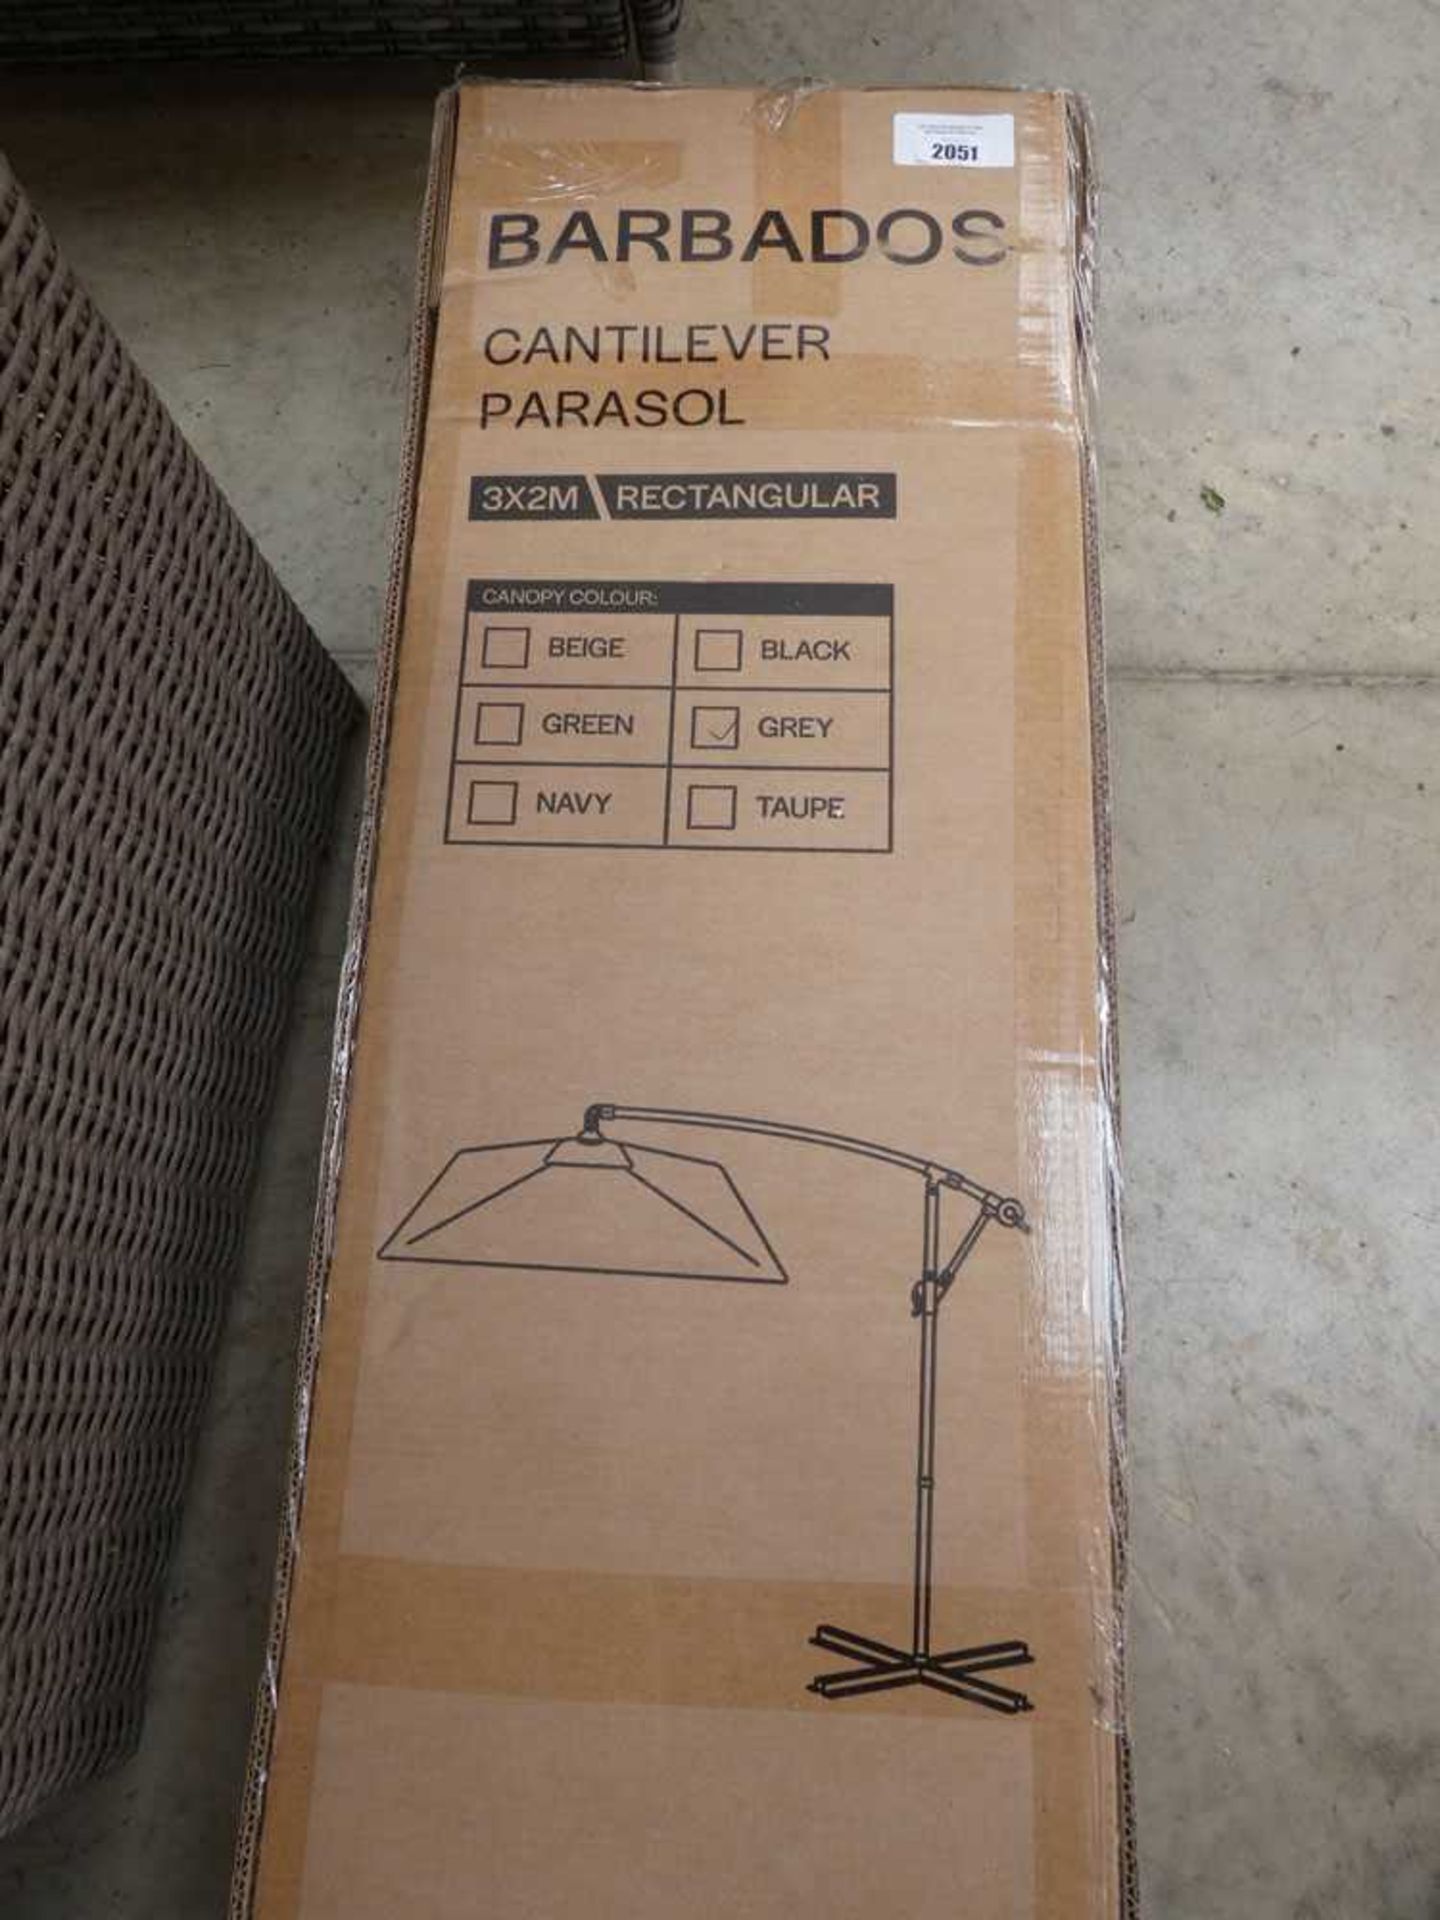 +VAT Boxed 3x2m rectangular cantilever parasol in grey - Image 2 of 2